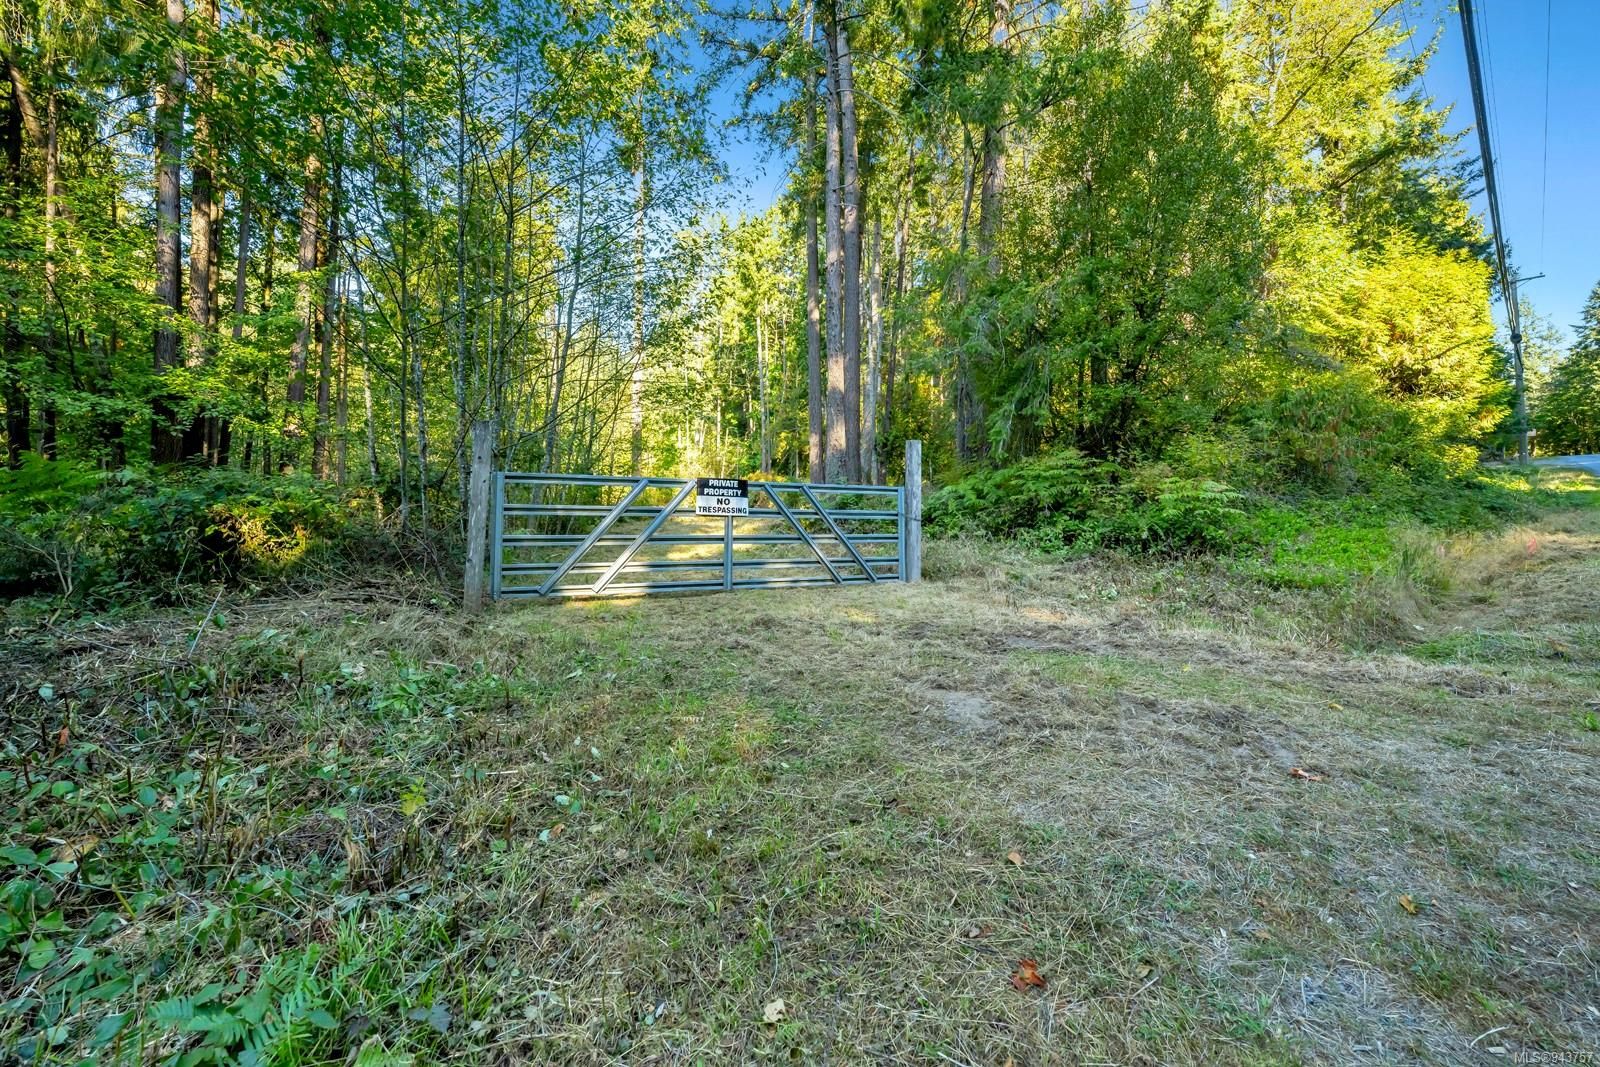 Welcome to Lot 1 Telegraph Road - 4.84 acres.